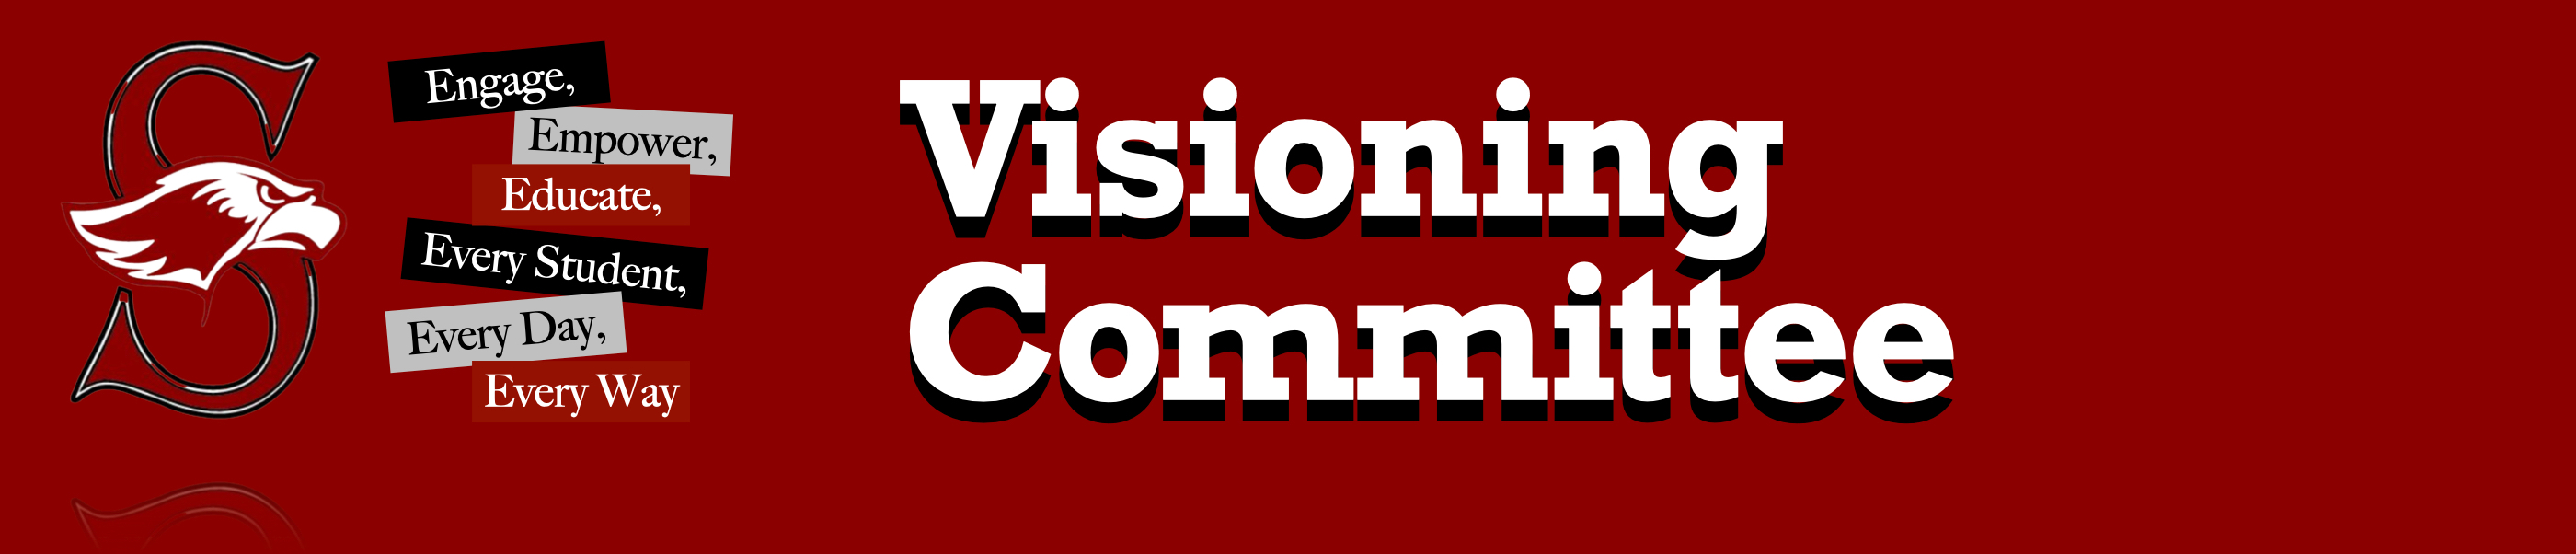 Visioning Committee